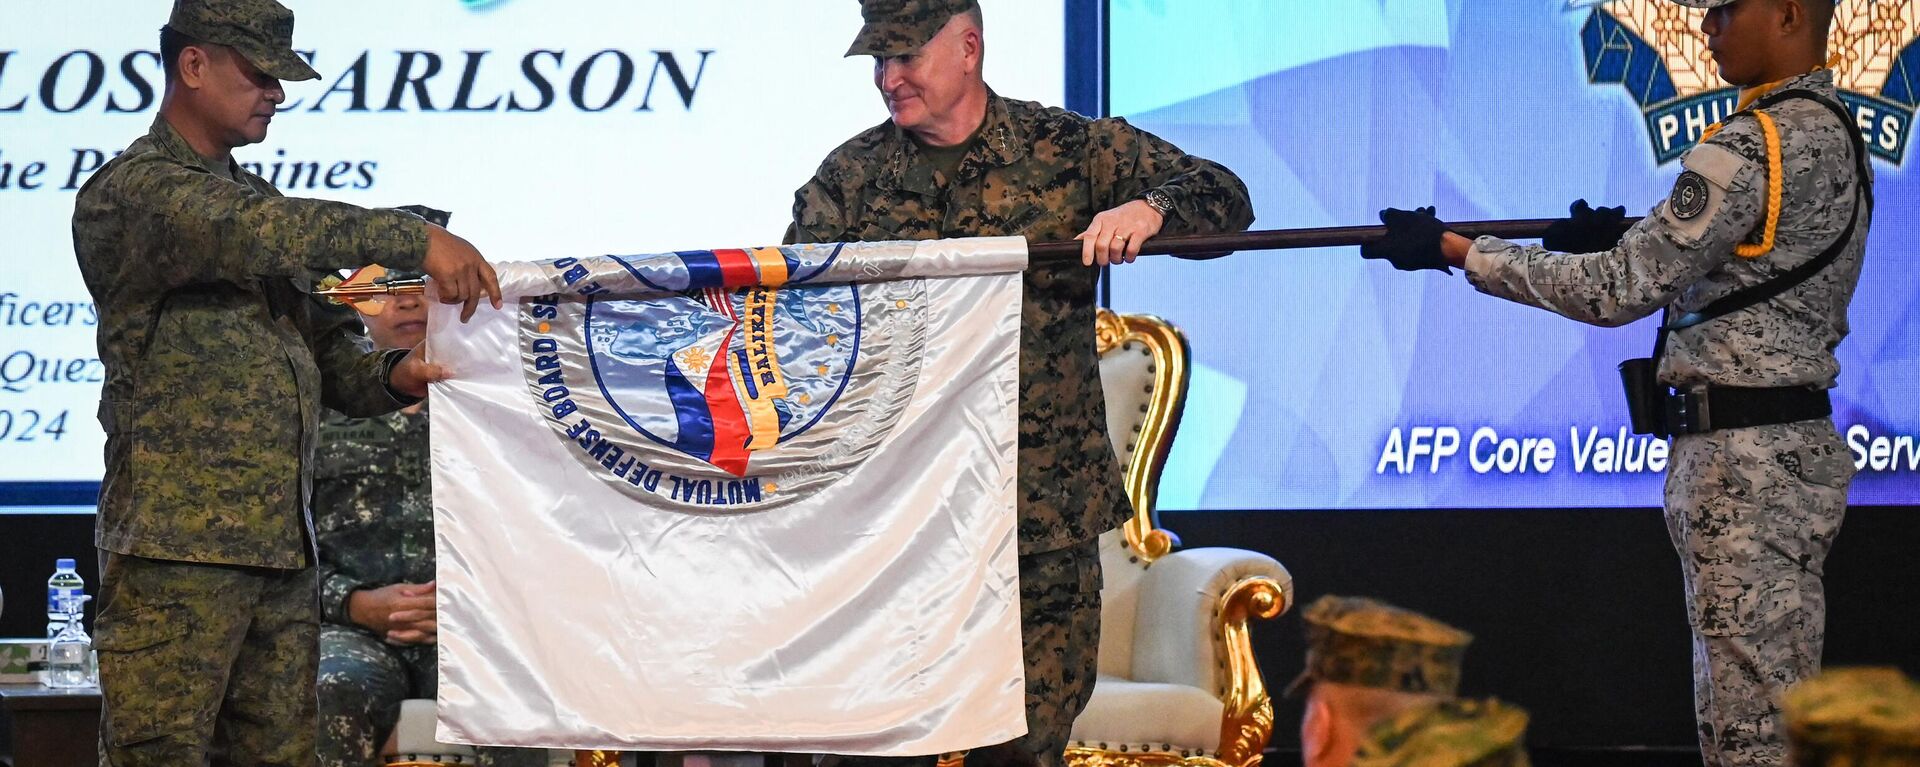 Philippines exercise director for Balikatan Major General Marvin Licudine (L) and US exercise director for Balikatan Lieutenant General William Jurney (R) unfurl the exercise flag during the opening ceremony of the 'Balikatan' joint military exercise at the military headquarters in Quezon City, suburban Manila on April 22, 2024. - Sputnik International, 1920, 22.04.2024